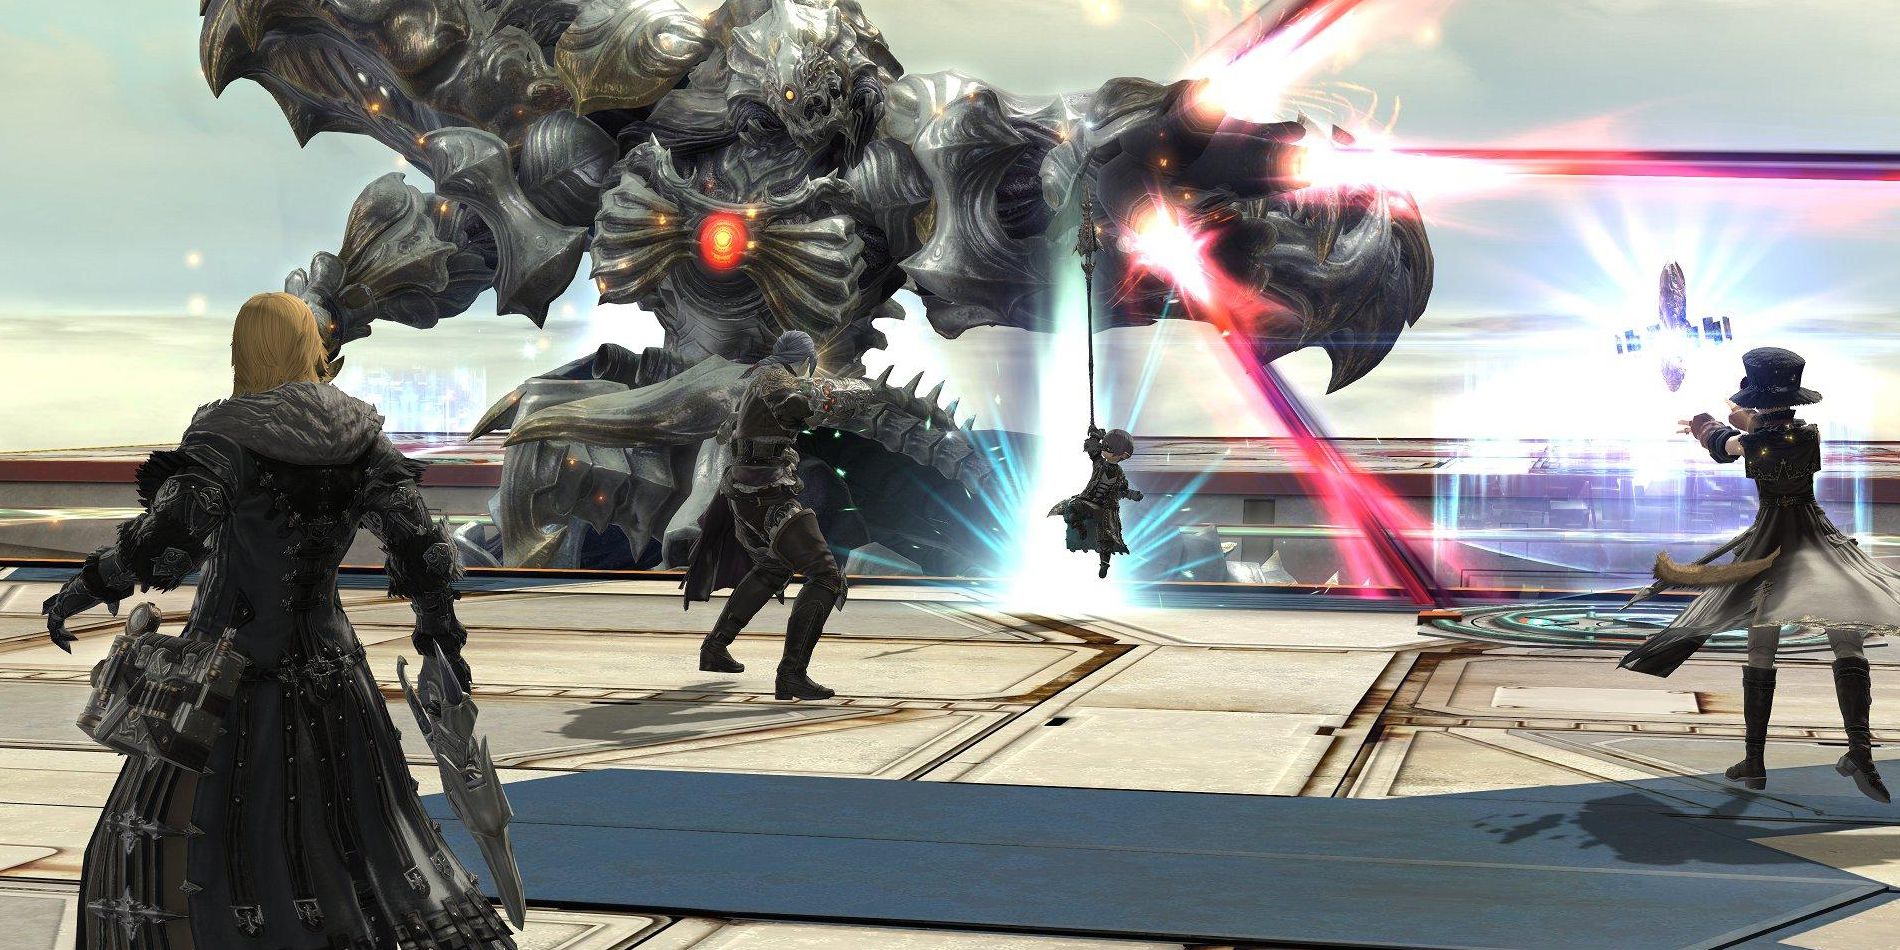 PlayStation 5 beta users can experience Final Fantasy 14 Diamond Weapon fight